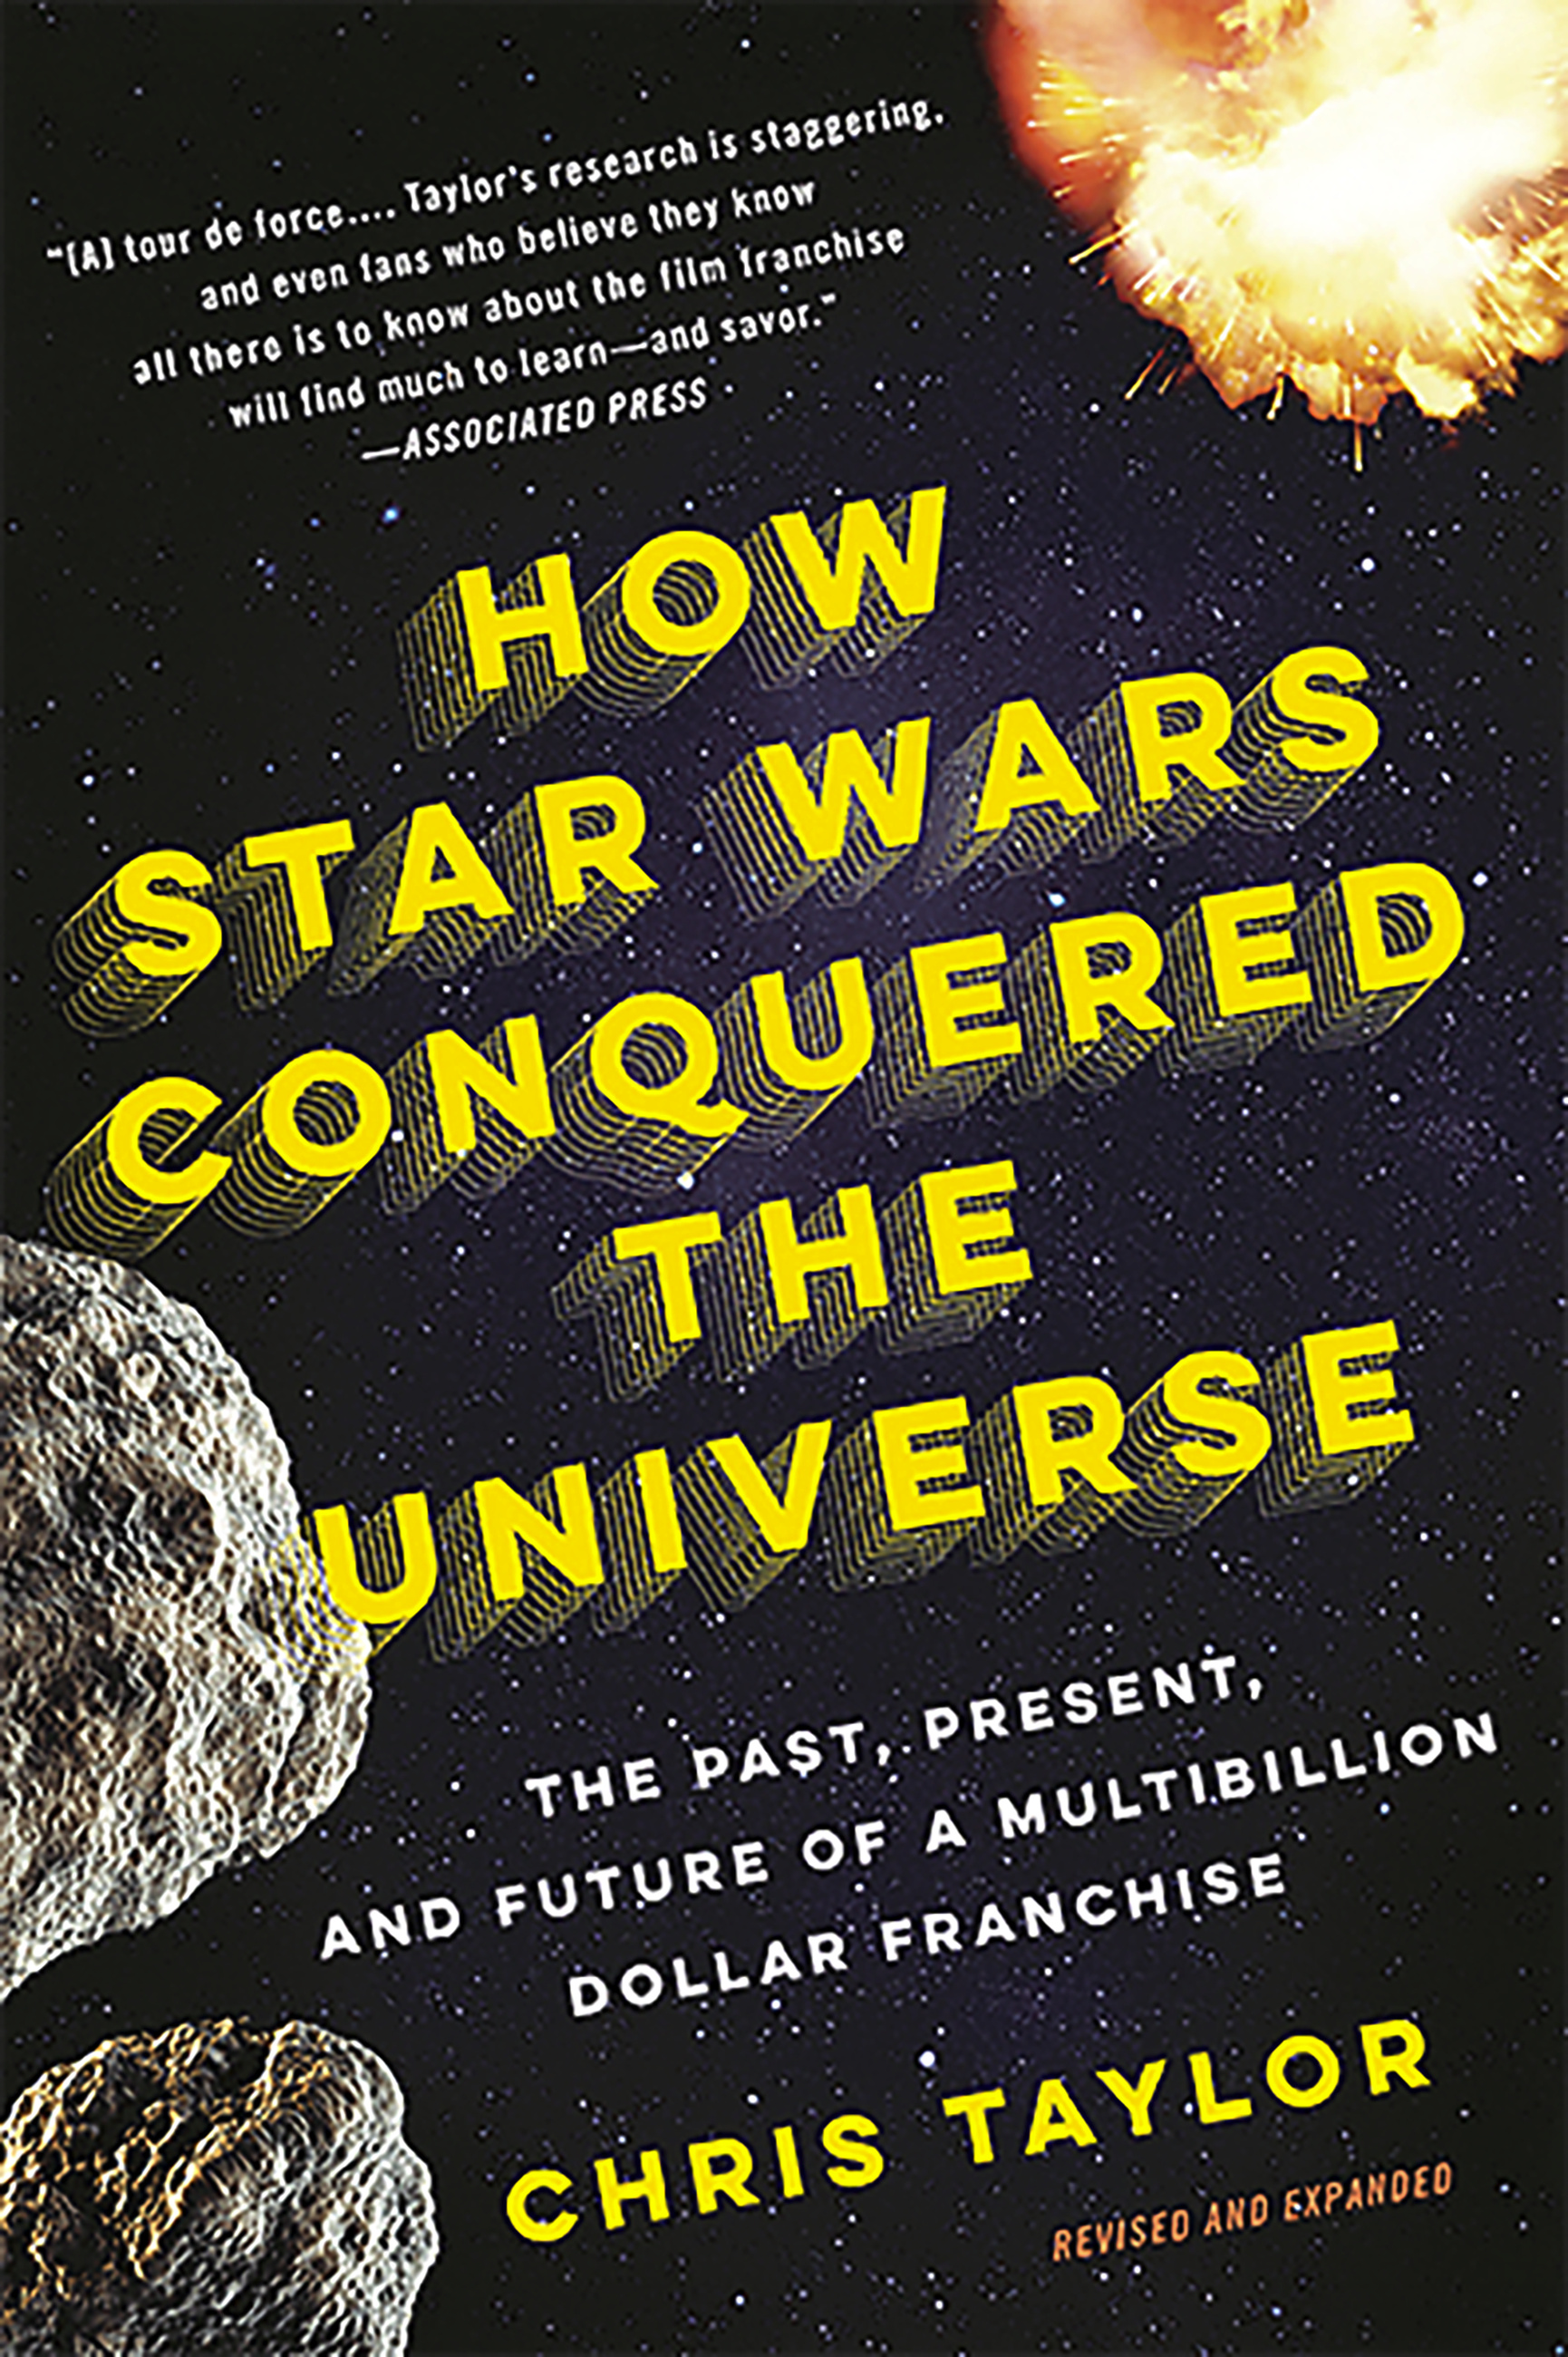 the　How　Conquered　Chris　Star　by　Book　Taylor　Wars　Hachette　Universe　Group